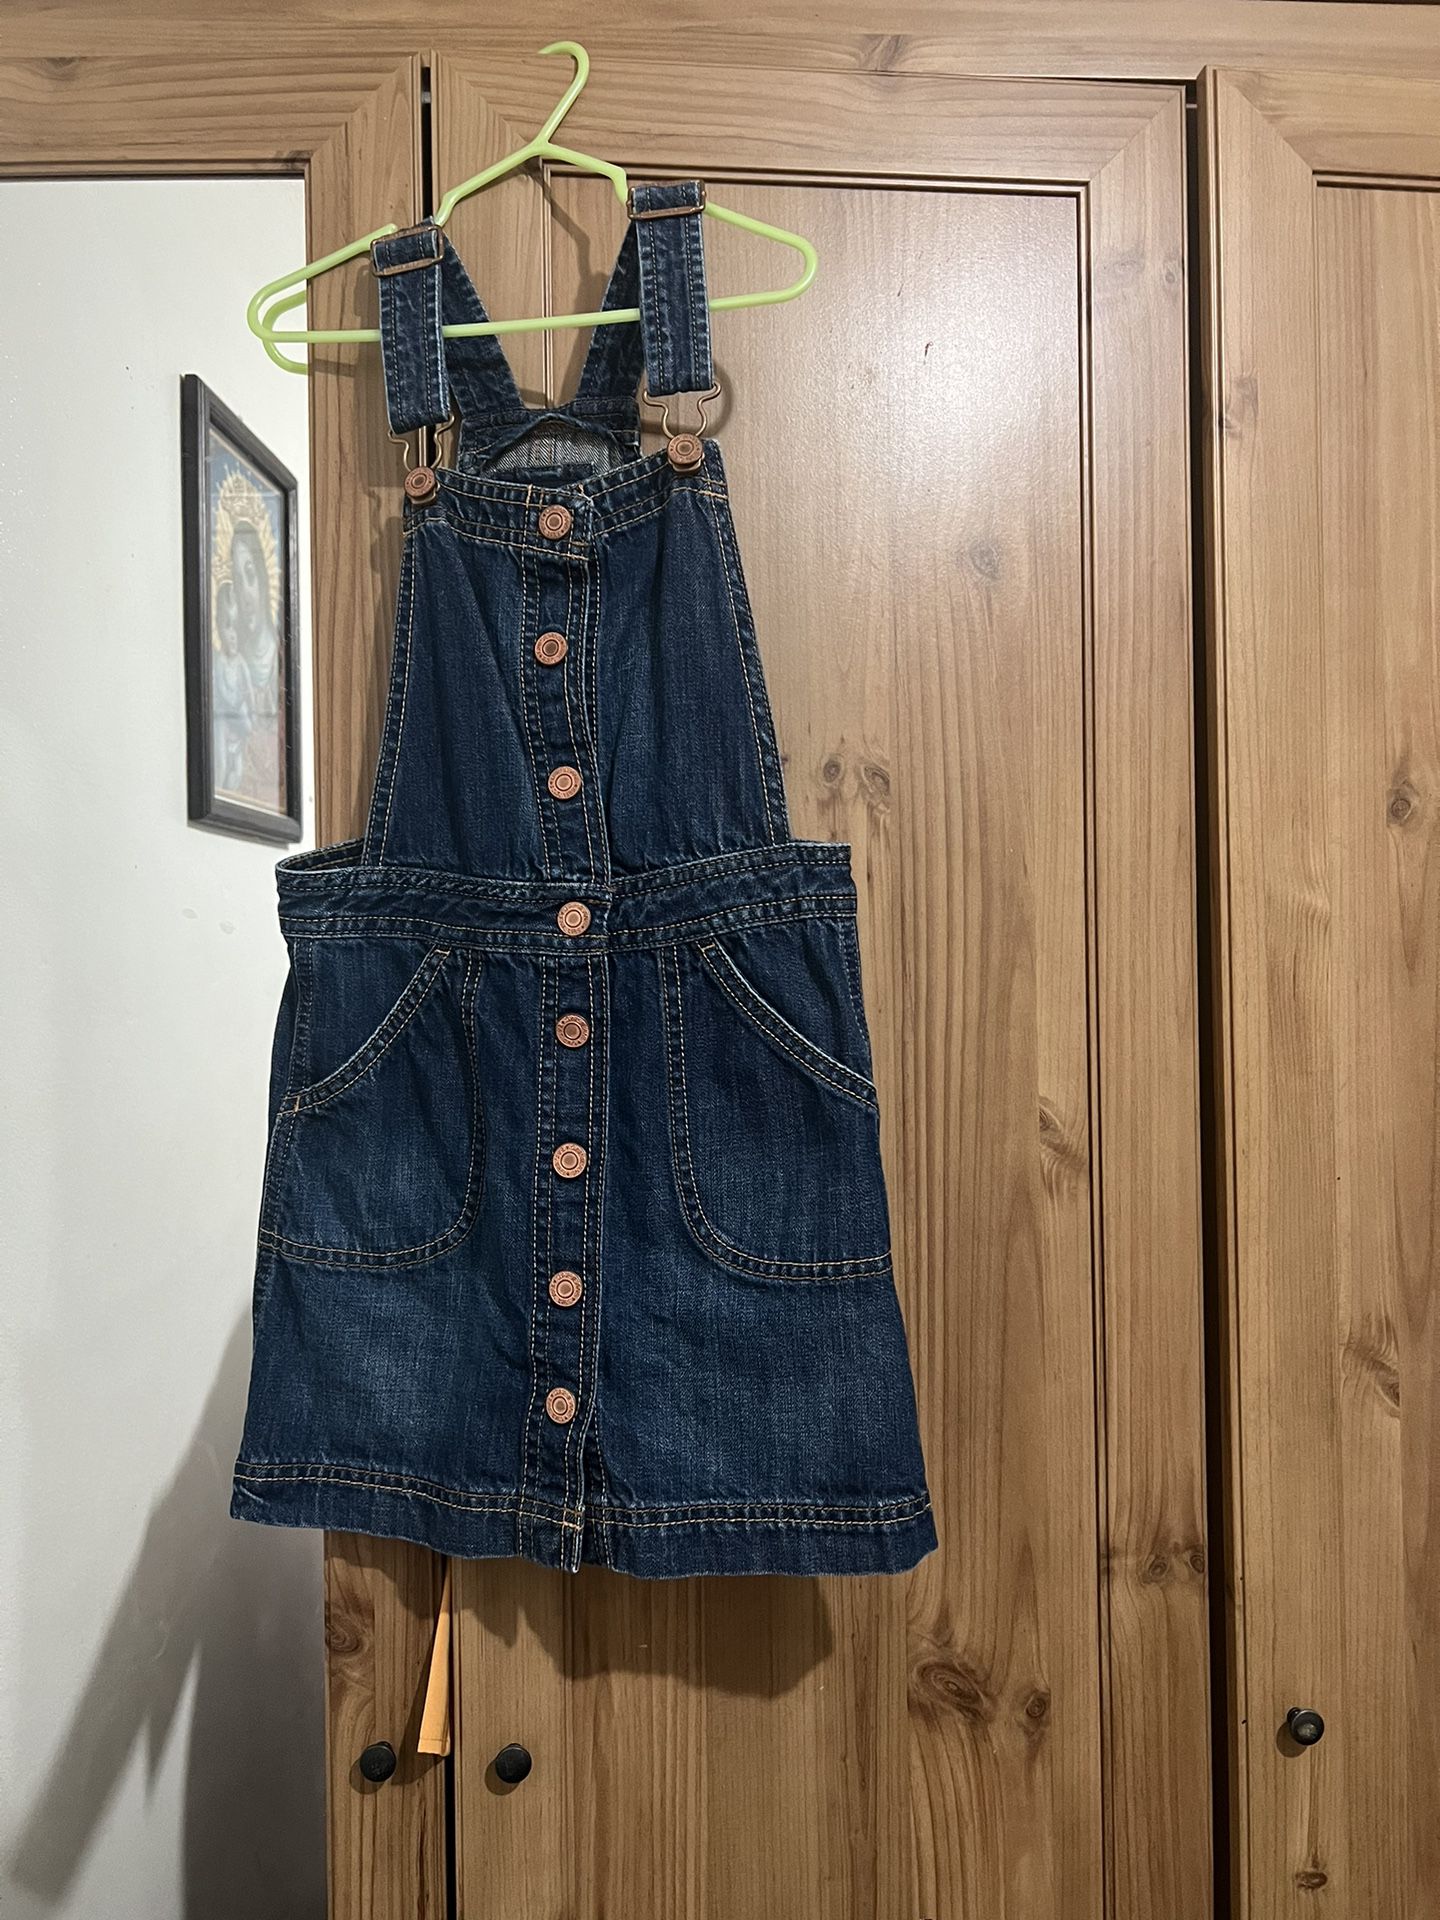 Gapkids Jean Overall Dress . Size Small